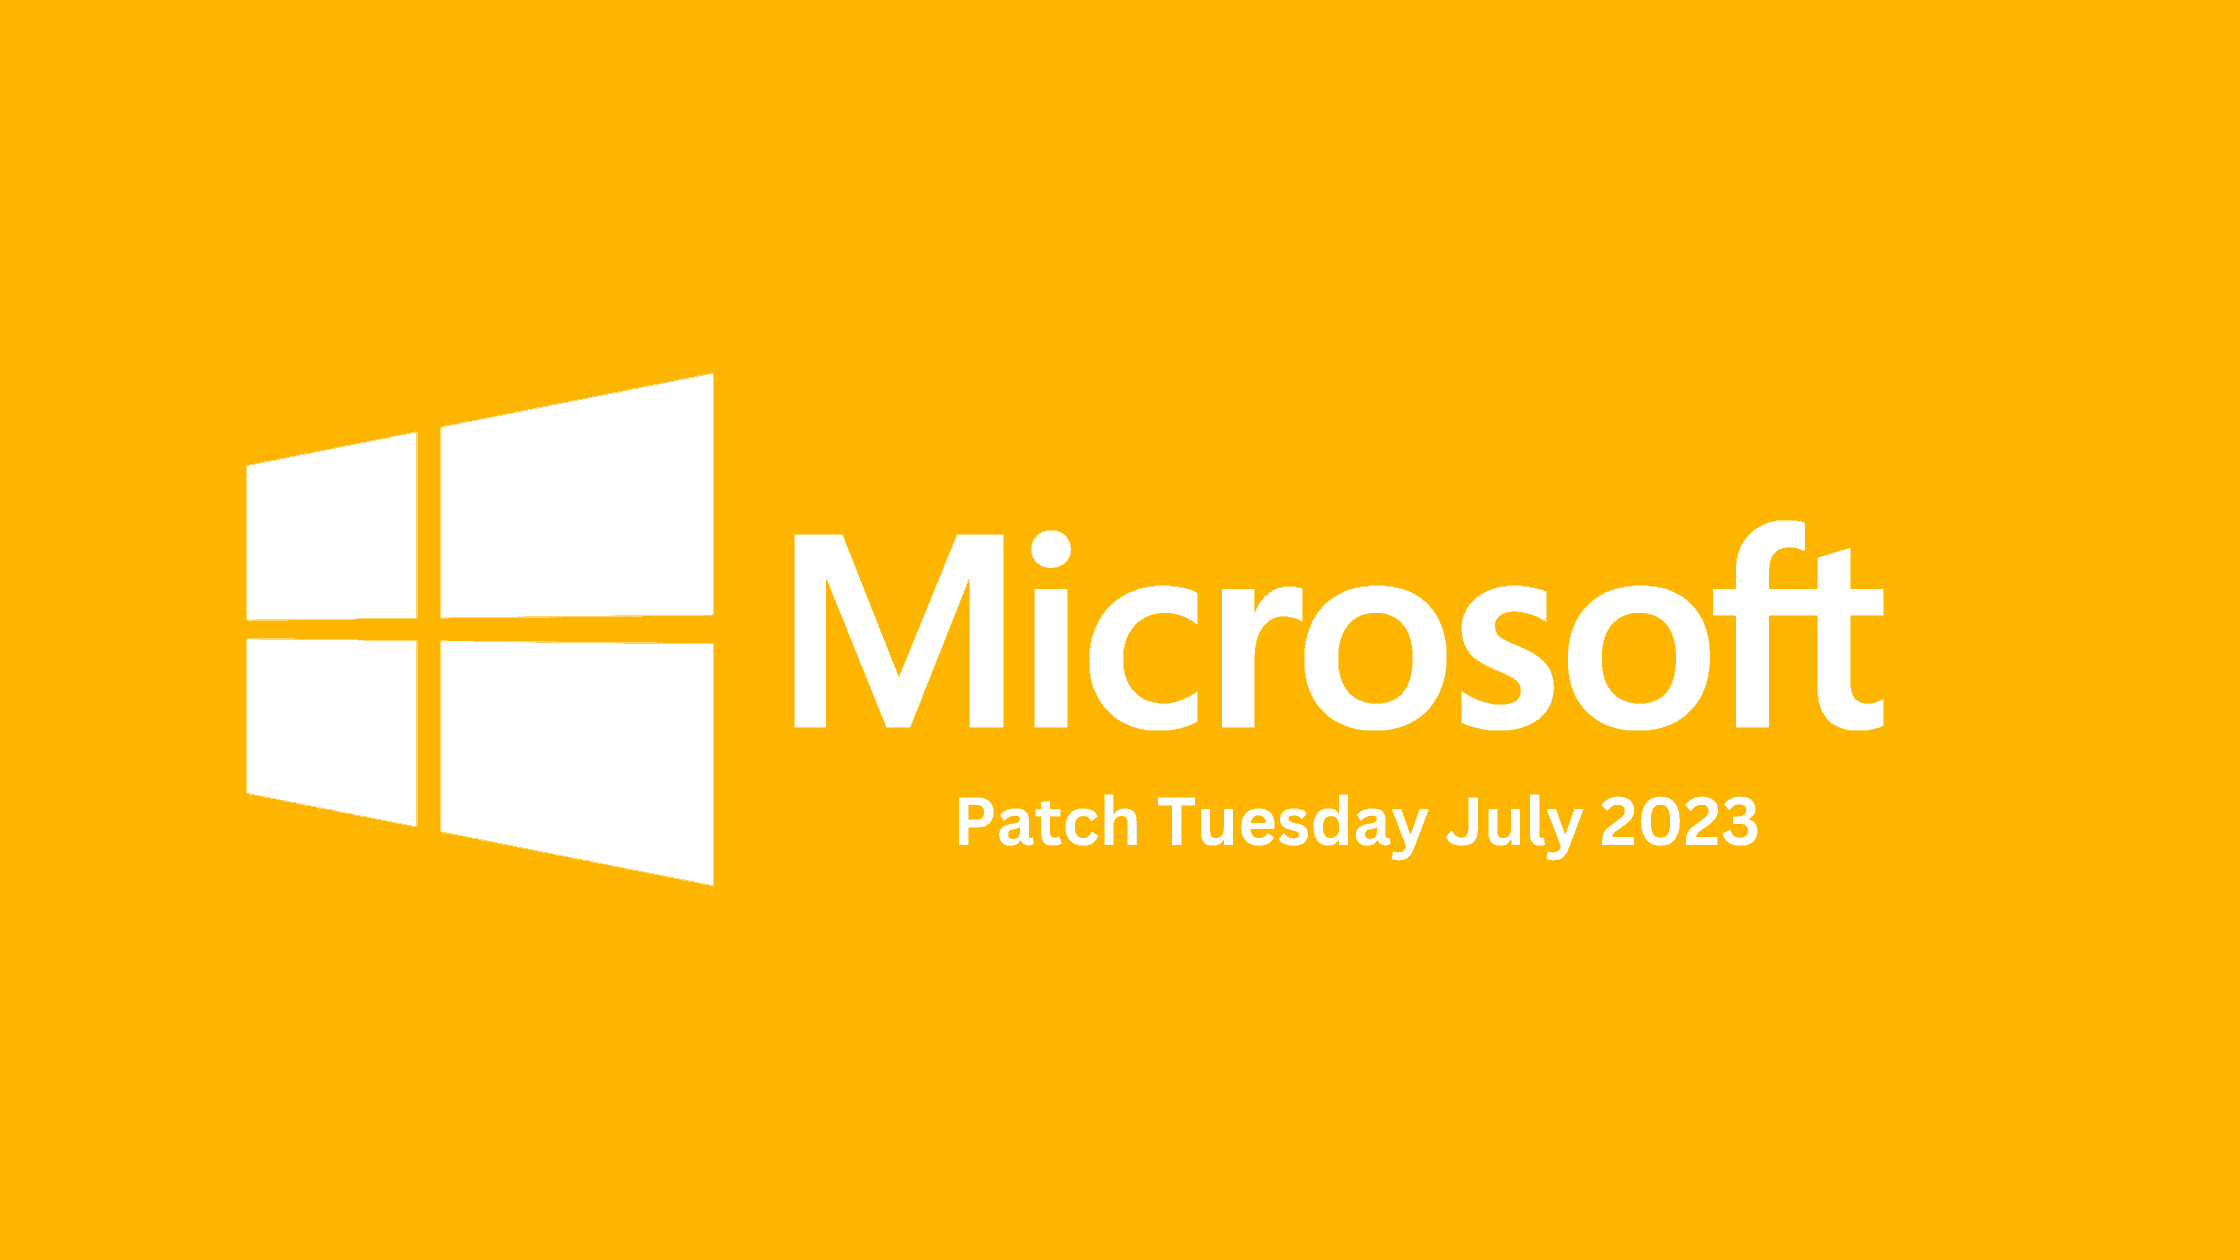 Breaking Down The Latest July 2023 Patch Tuesday Report